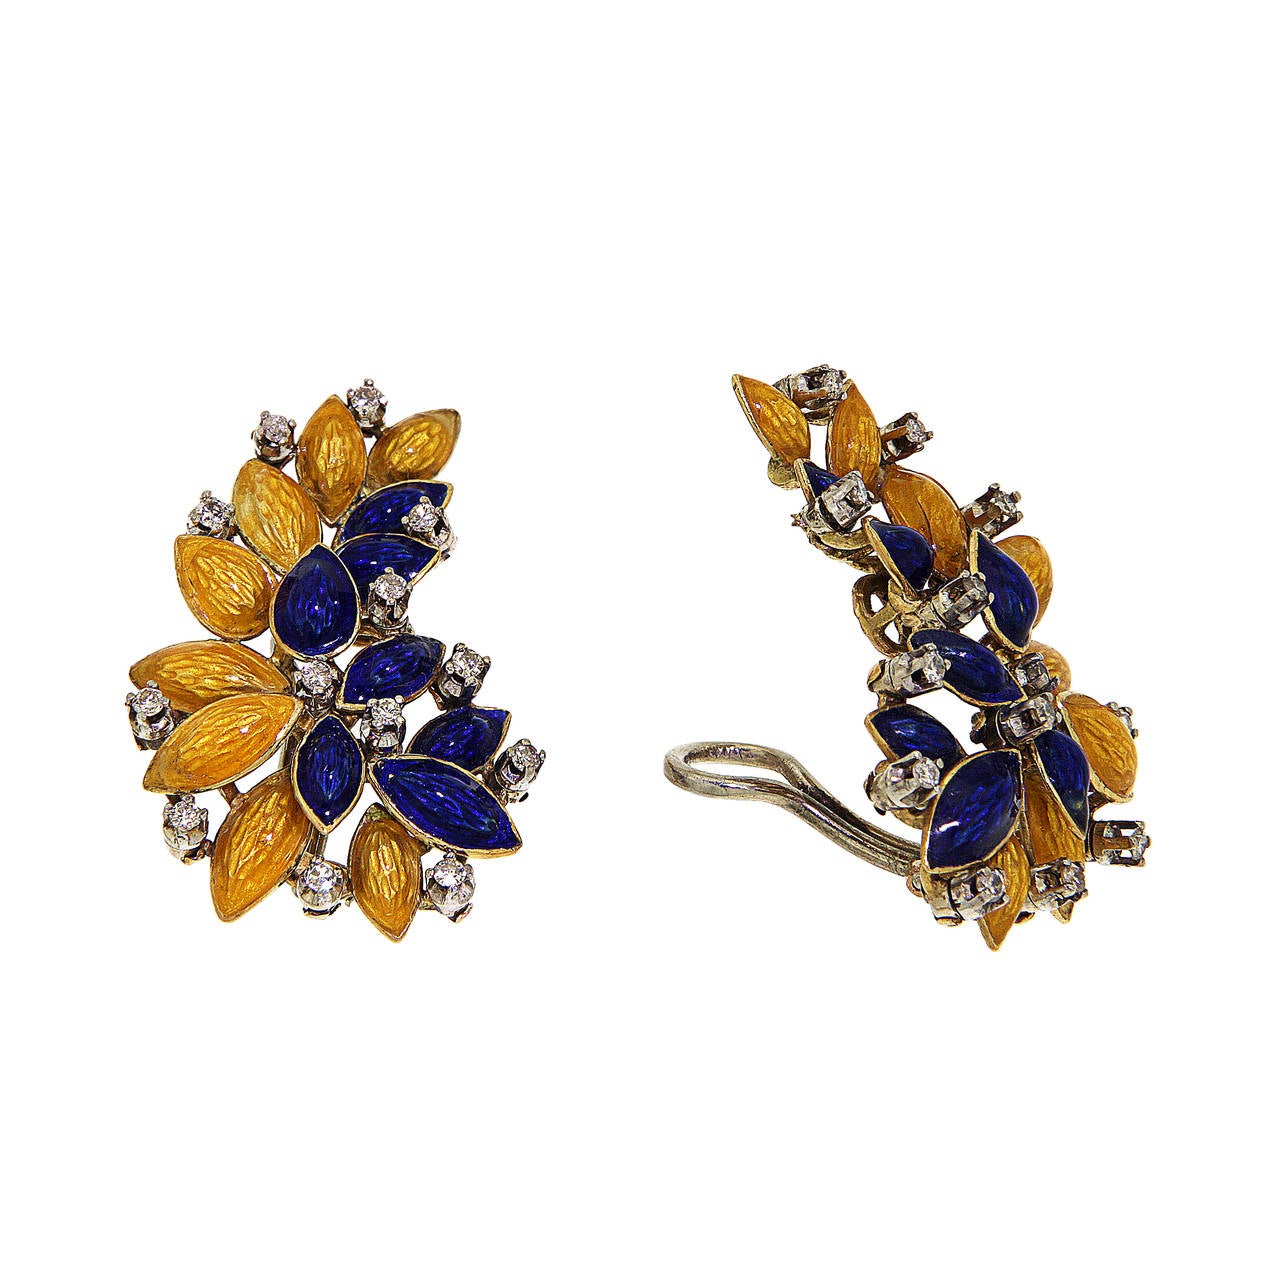 Stunning set including brooch, clip-on earrings and ring handmade into a floral pattern. Dating back to the 1950s, this composition is crafted in 18 karat yellow and white gold with yellow and blue enamel. 59 brilliant cut diamonds, weighing 1.00